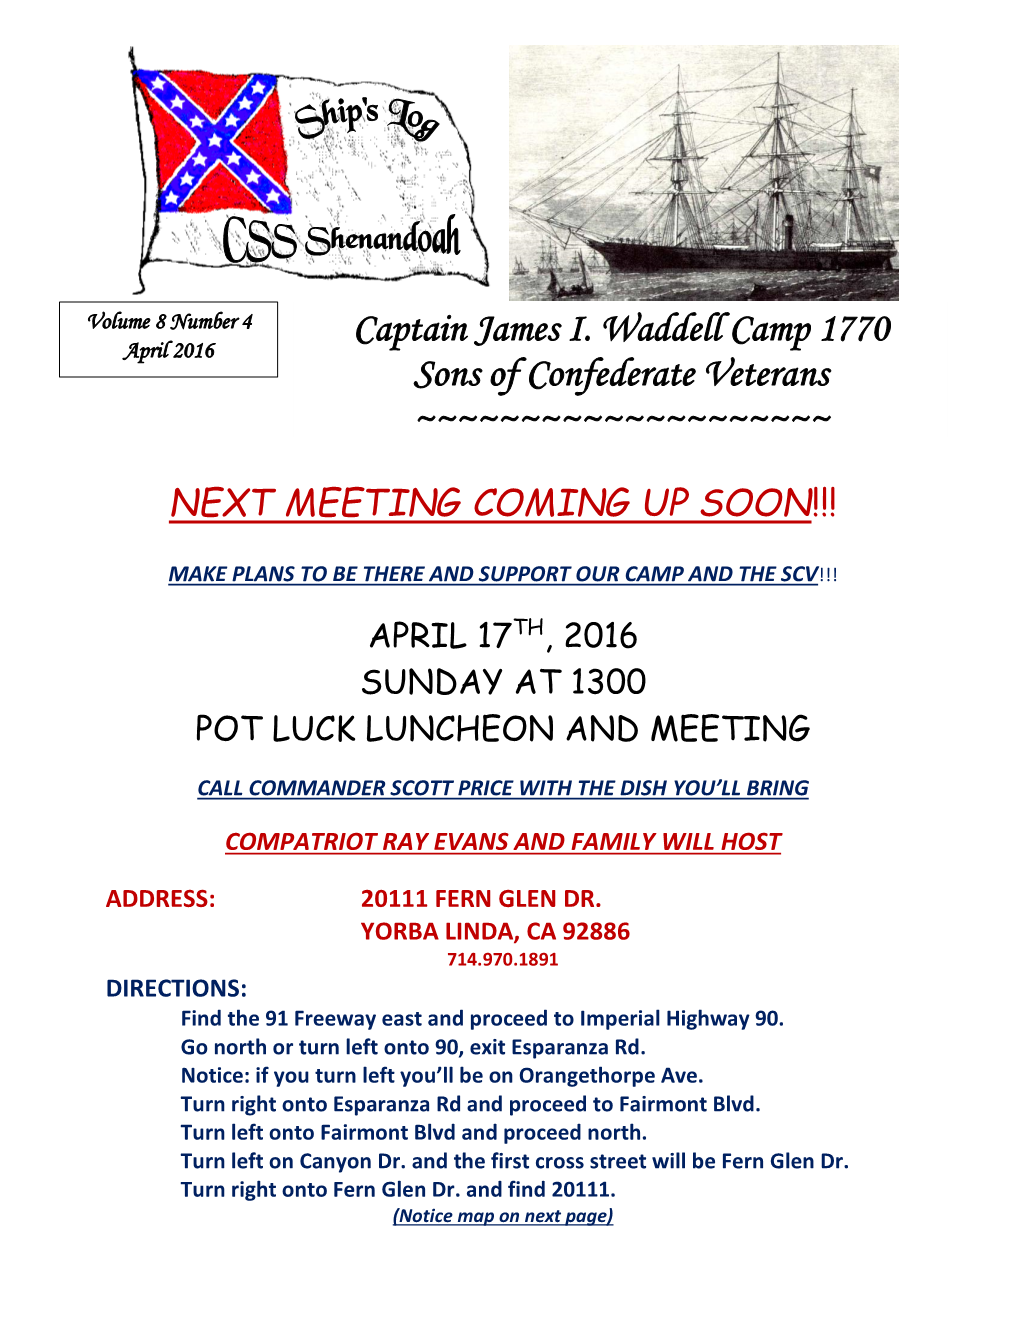 Captain James I. Waddell Camp 1770 Sons of Confederate Veterans